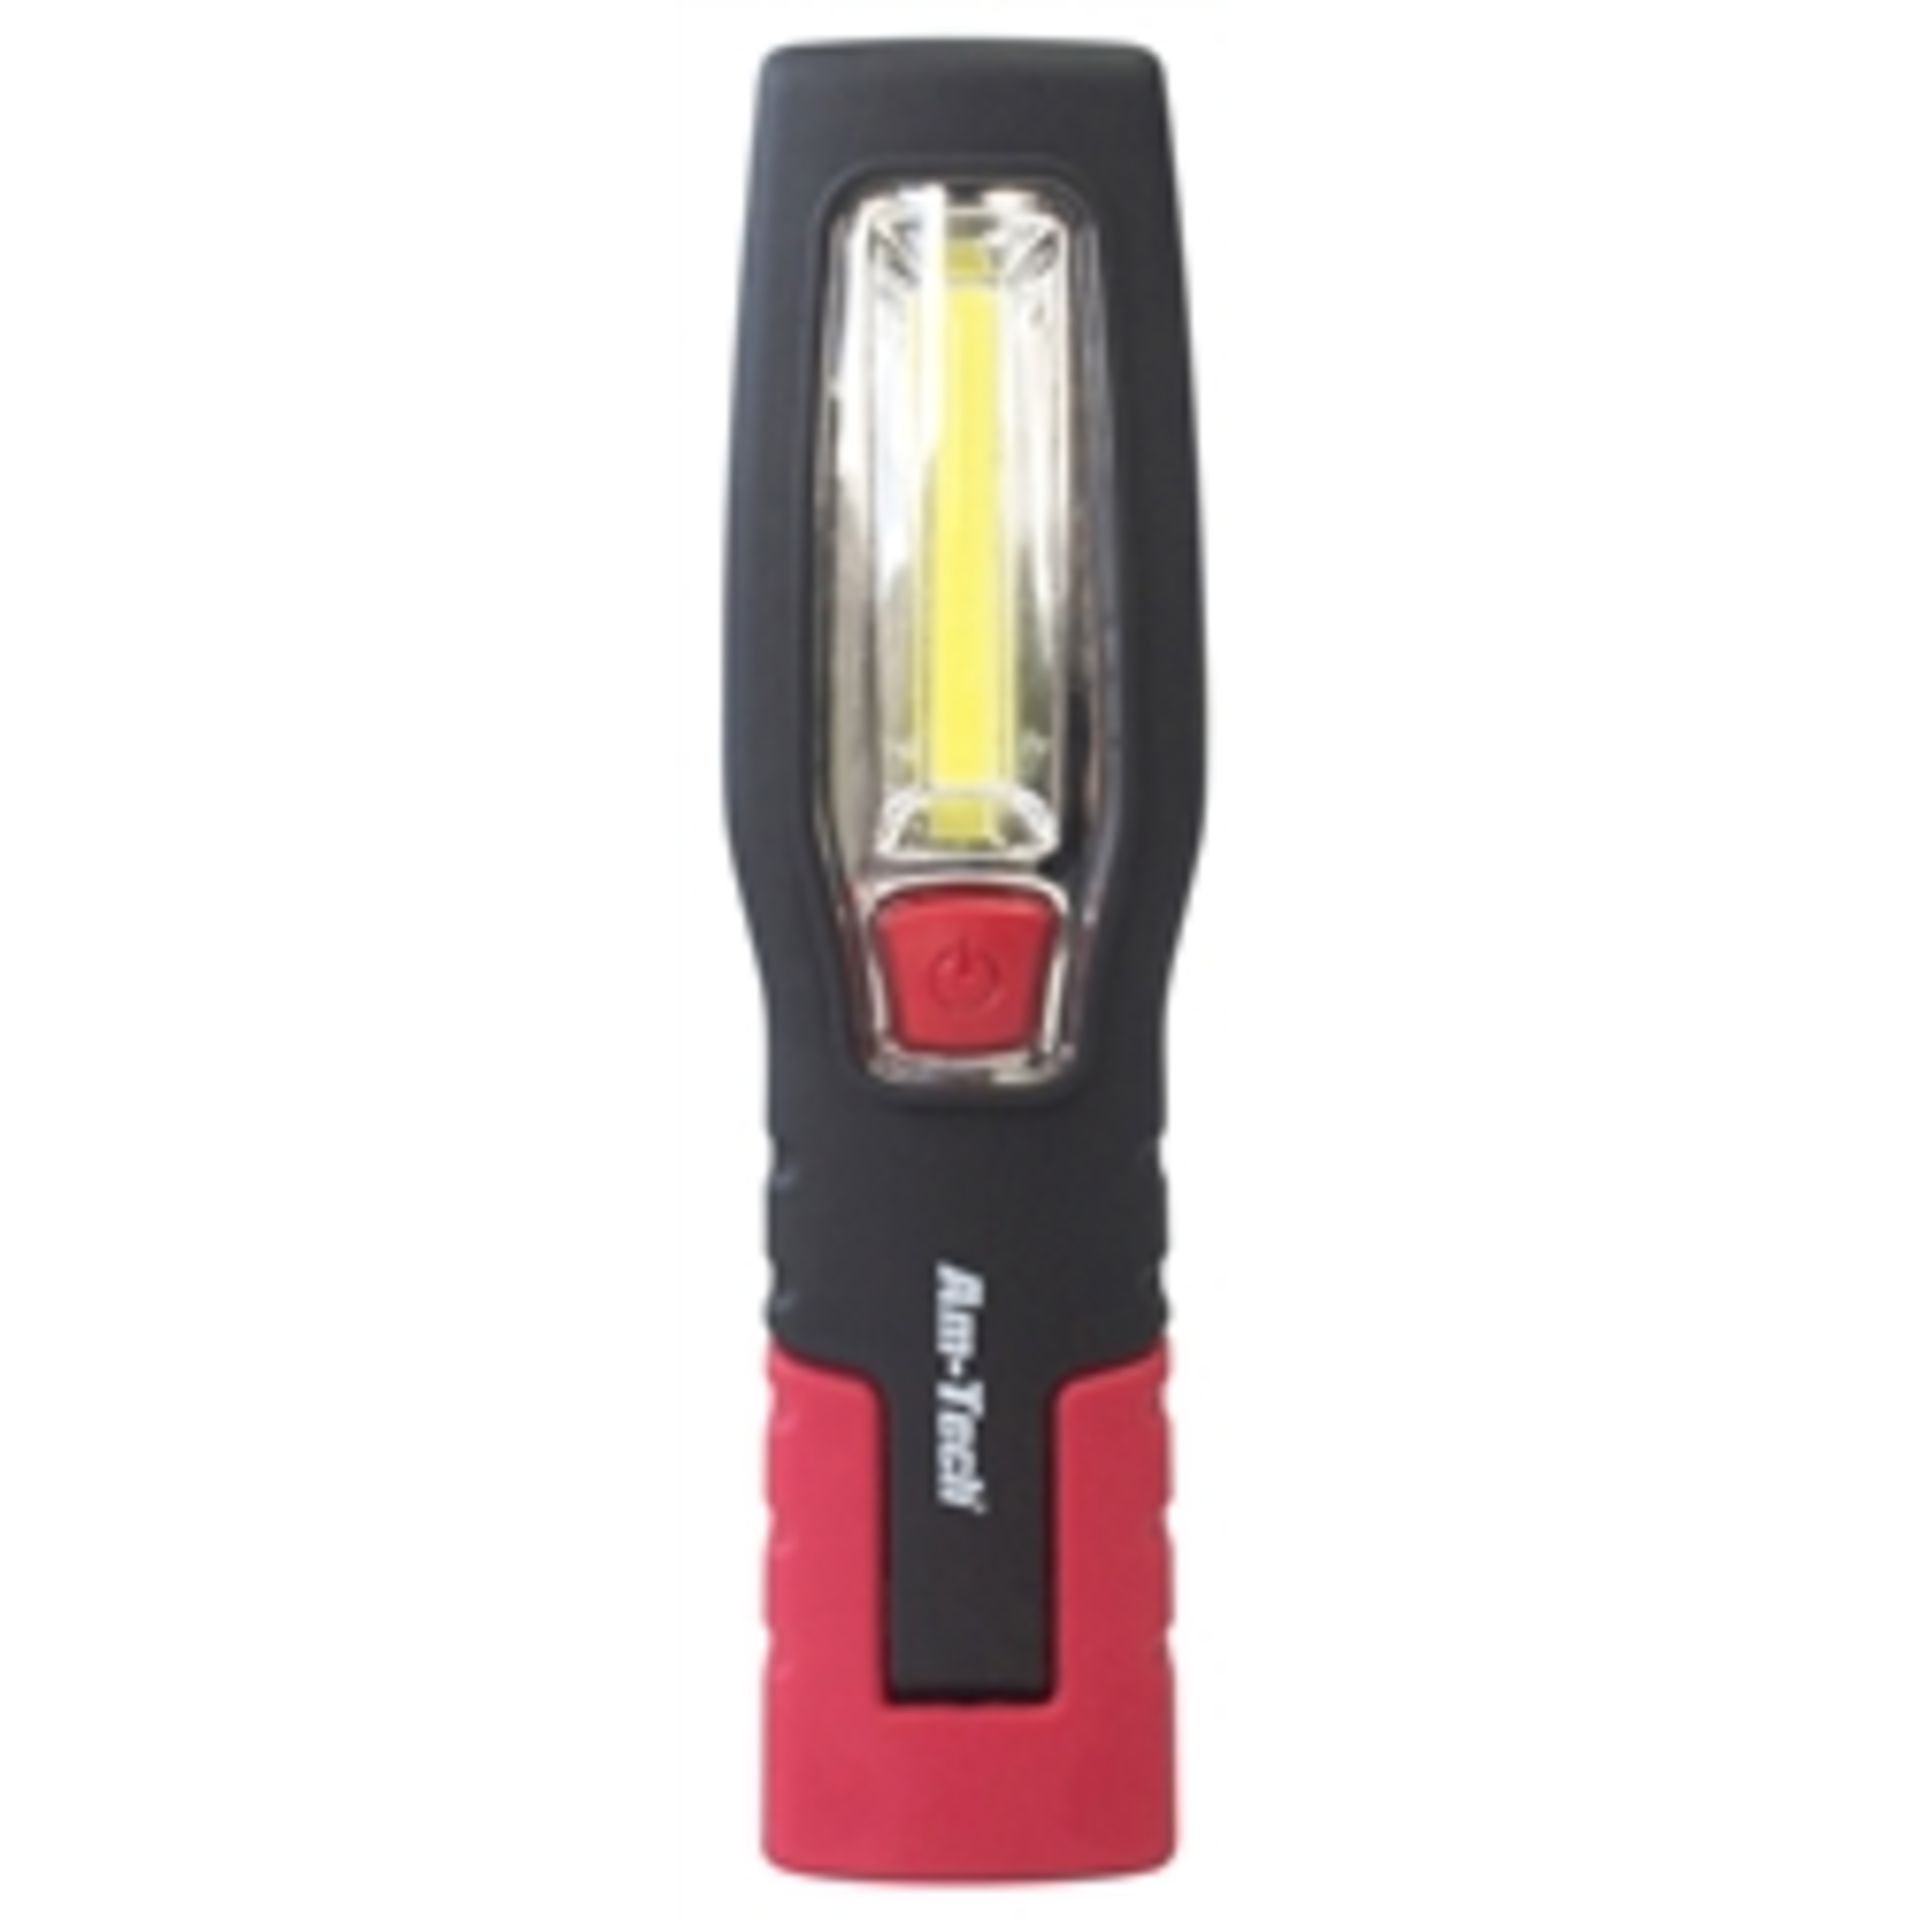 V Brand New 3 Watt Cob LED Worklight With Hanging Hook, Swivel Magnetic Base X 2 YOUR BID PRICE TO